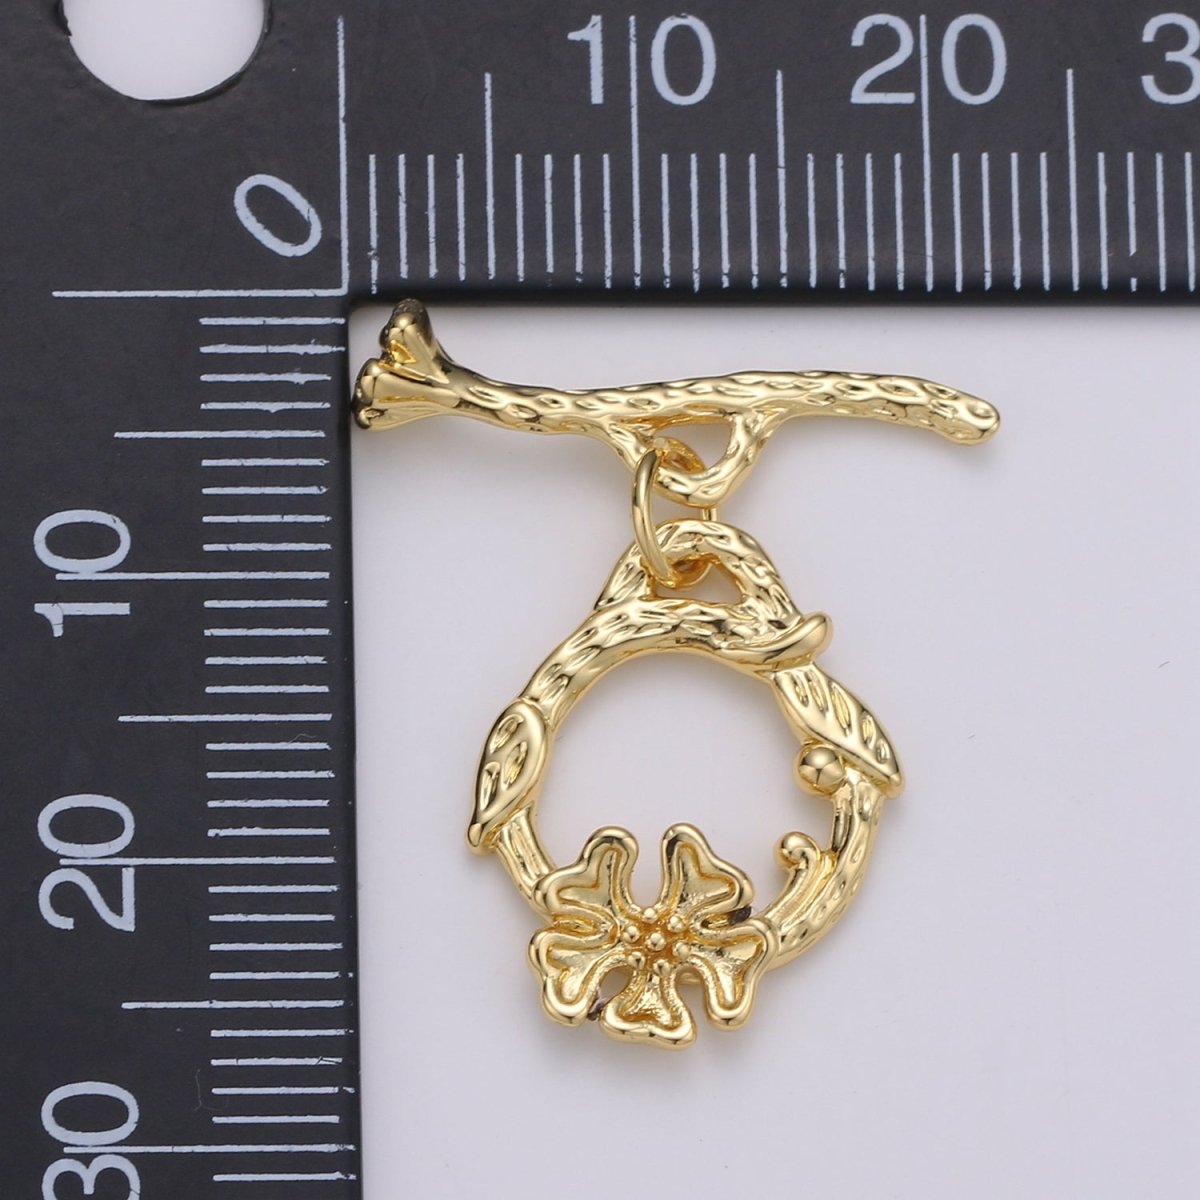 Dainty Gold Toggle Clasp 24K Gold Filled Flower Toggle Clasps Fancy Design OT Clasp Supply for Bracelet Necklace Component - DLUXCA